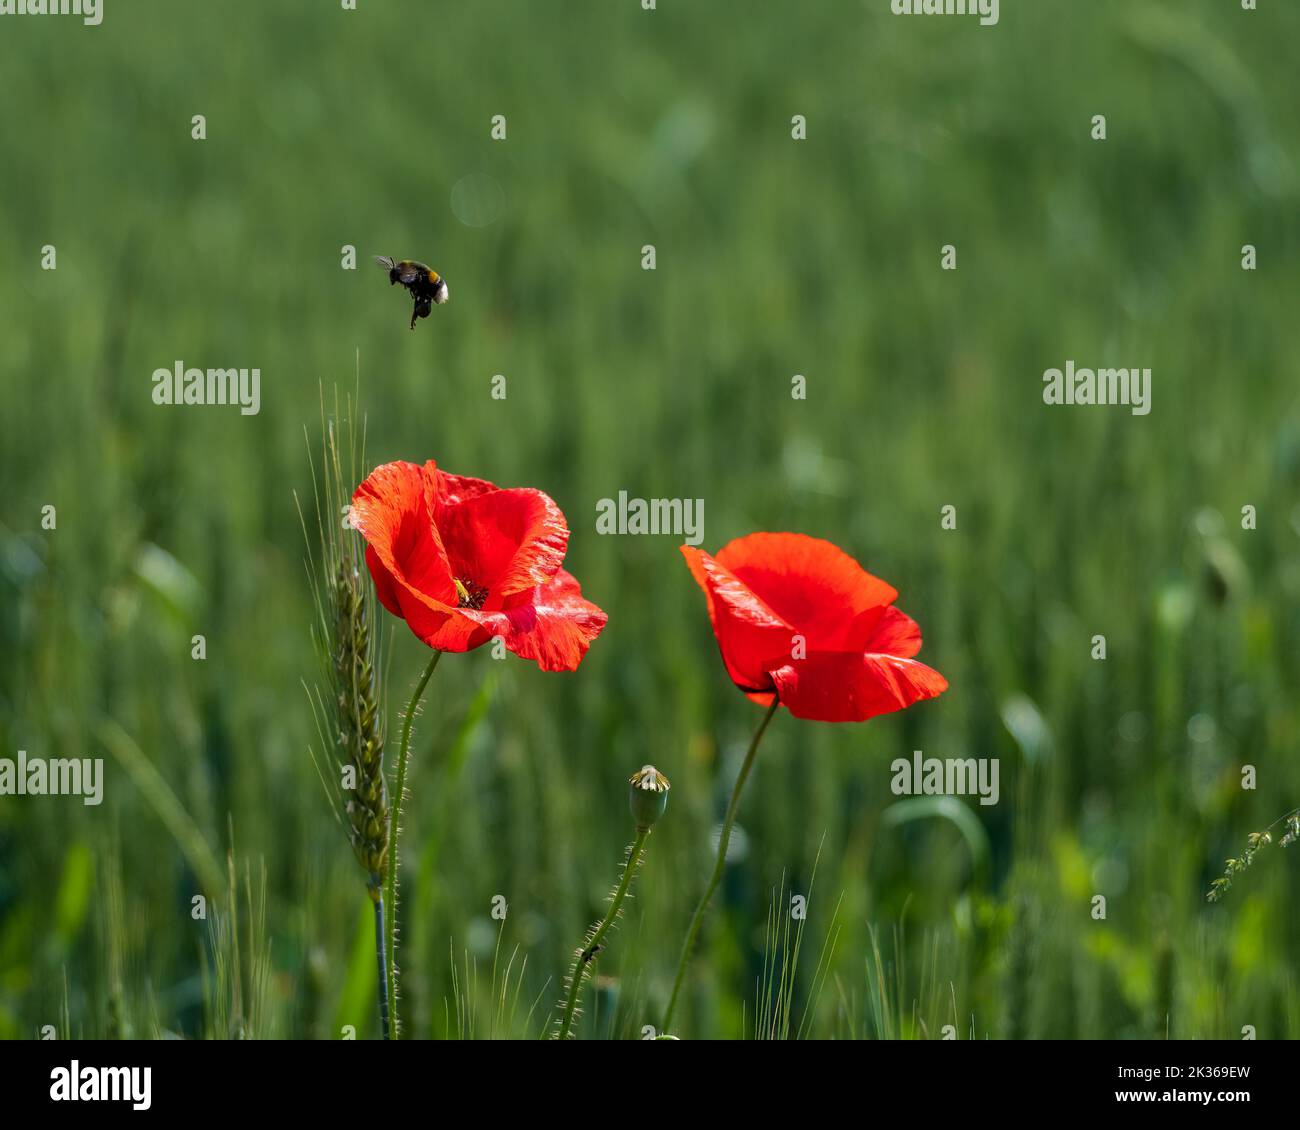 bumble bee hovering over red poppy flowers on green field Stock Photo